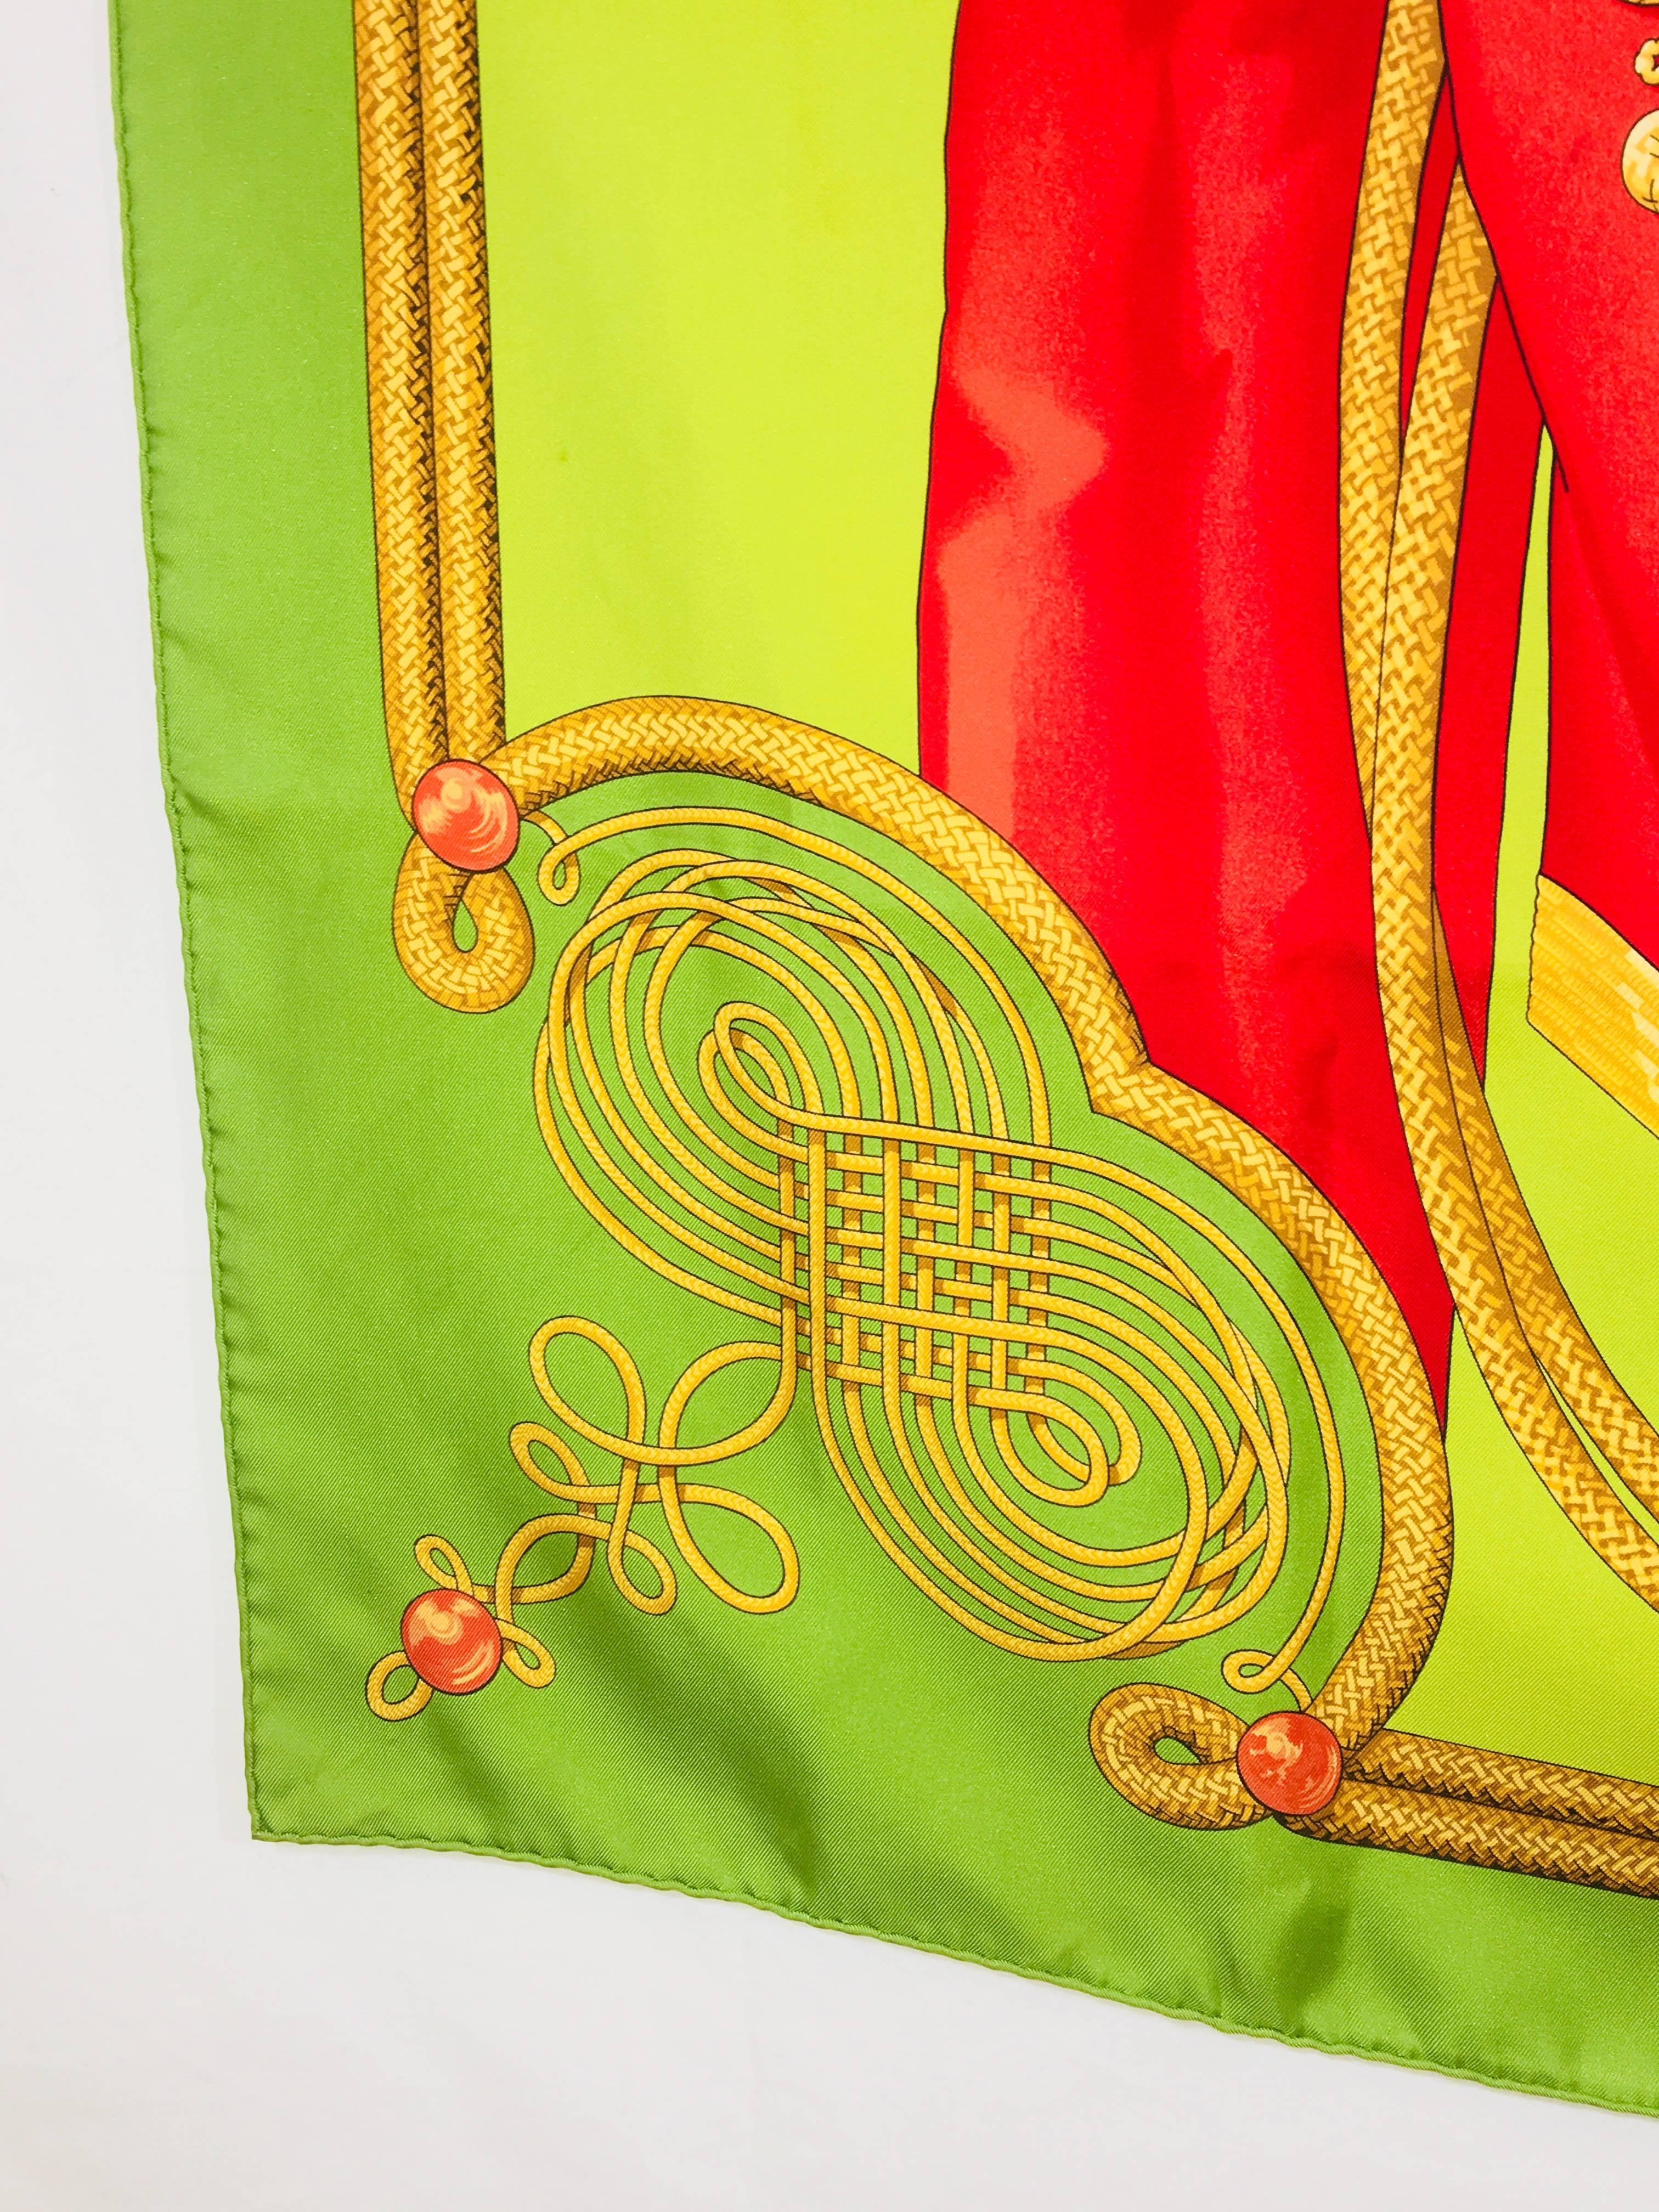 Brandebourg Hermès Scarf with Box. Yellow and Green Silk. The motif is inspired by drawings of military uniforms in the Émile Hermès collection